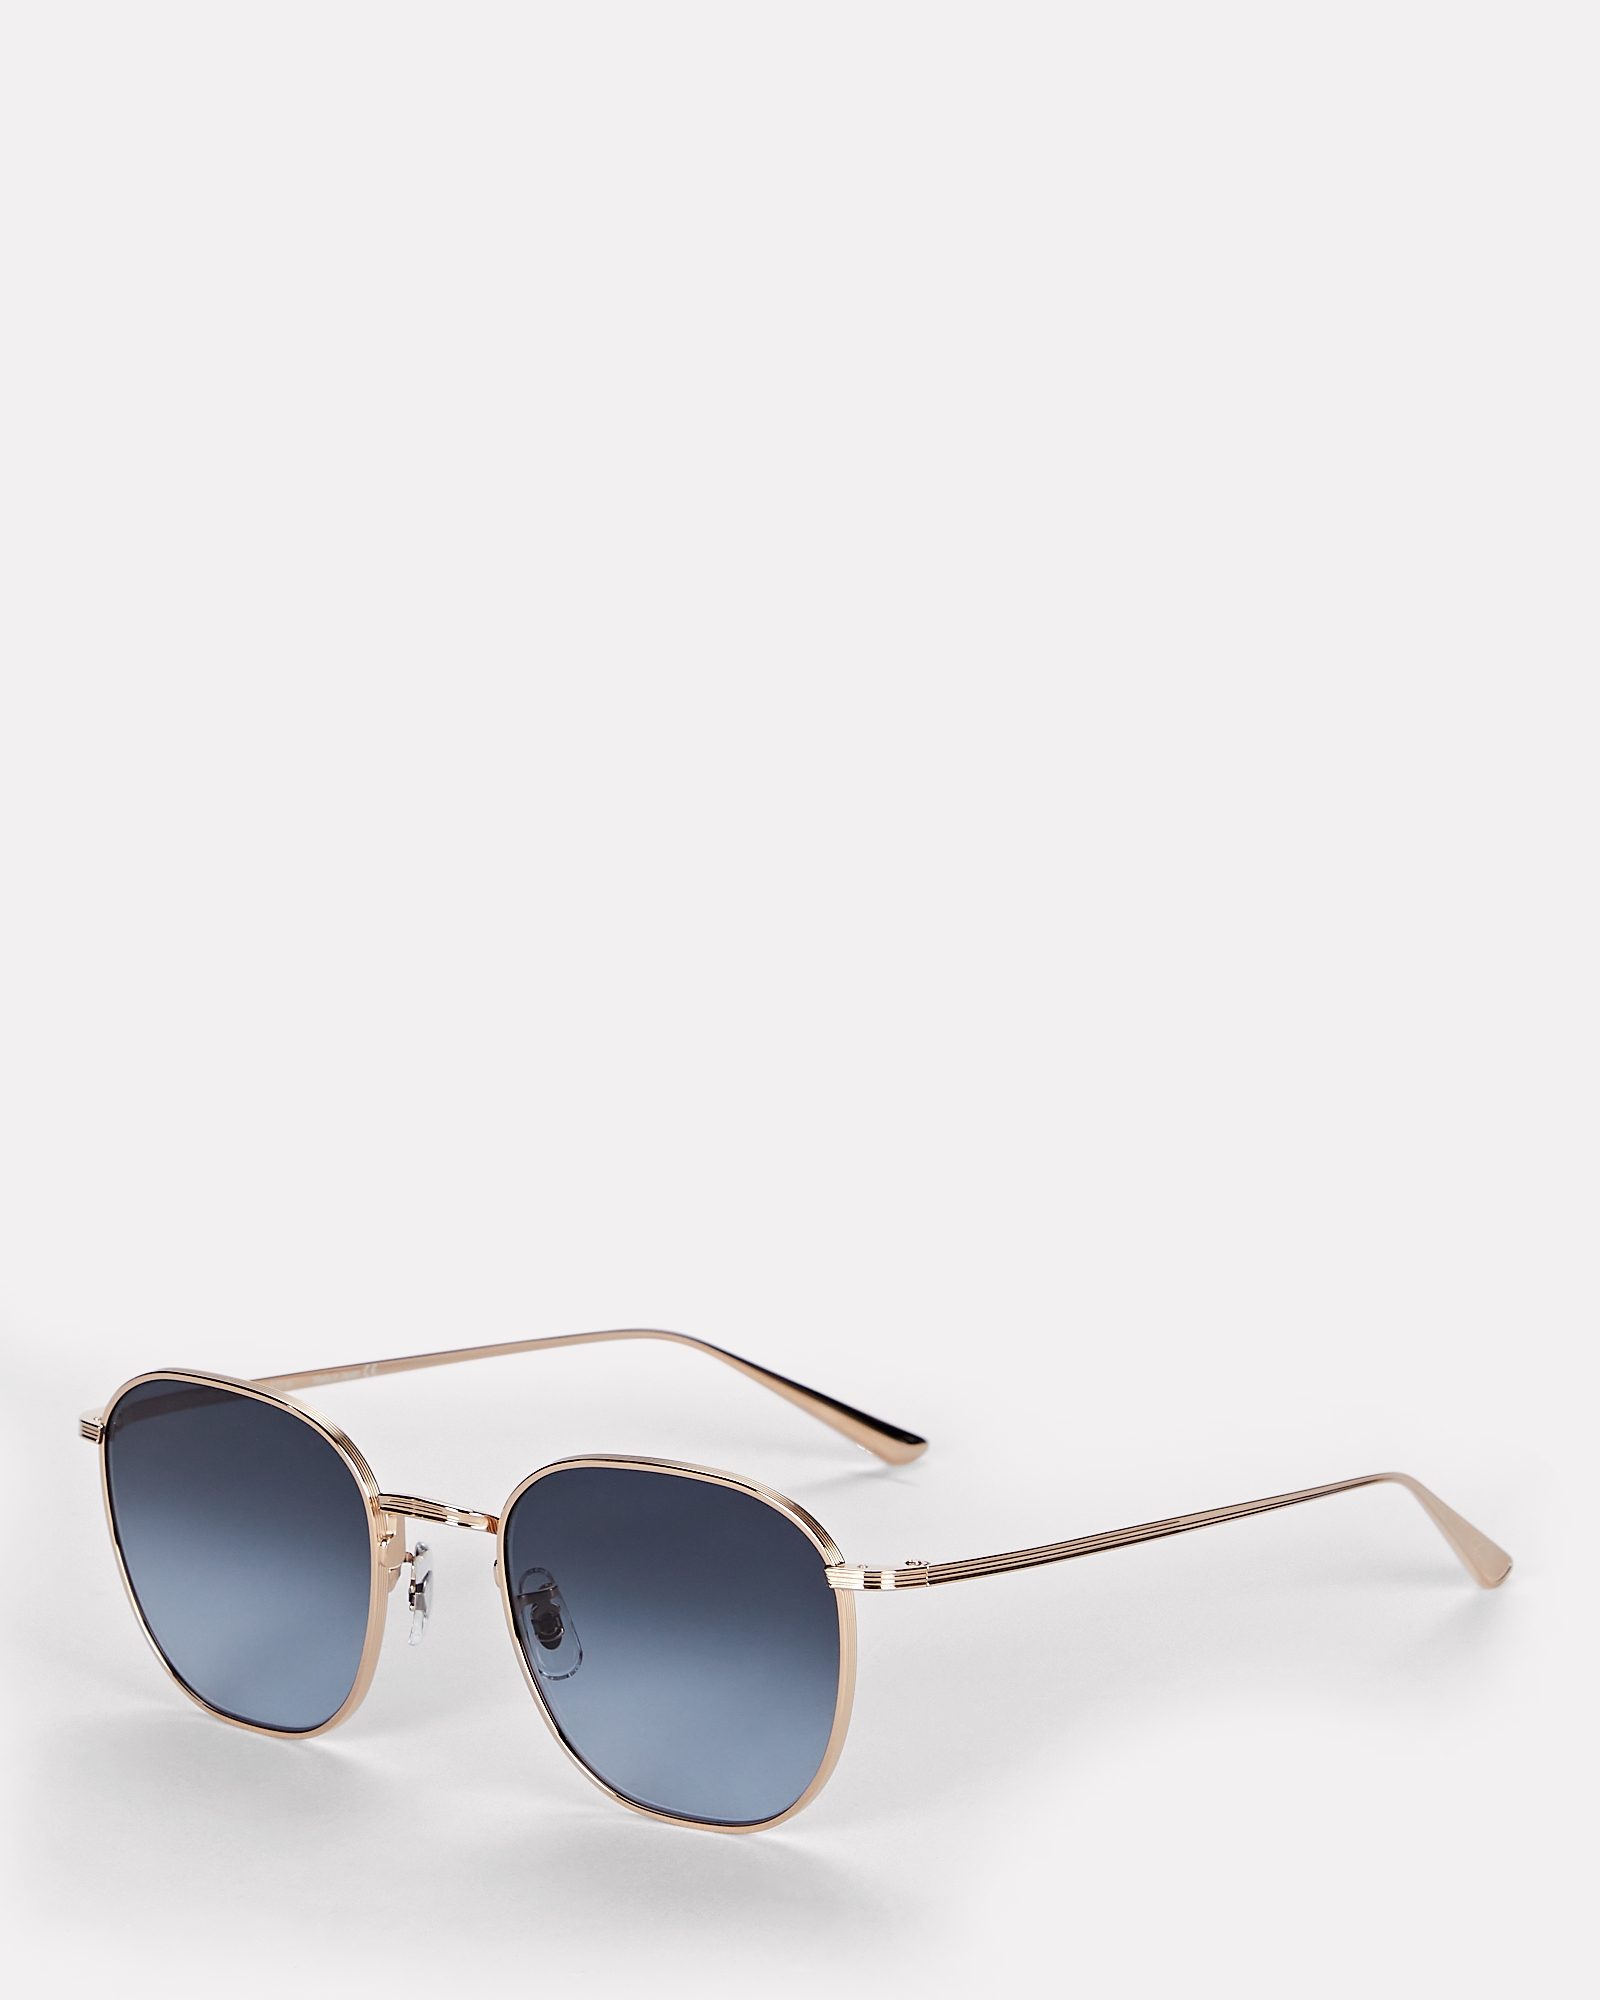 The Row x Oliver Peoples Board Meeting 2 Sunglasses | INTERMIX®